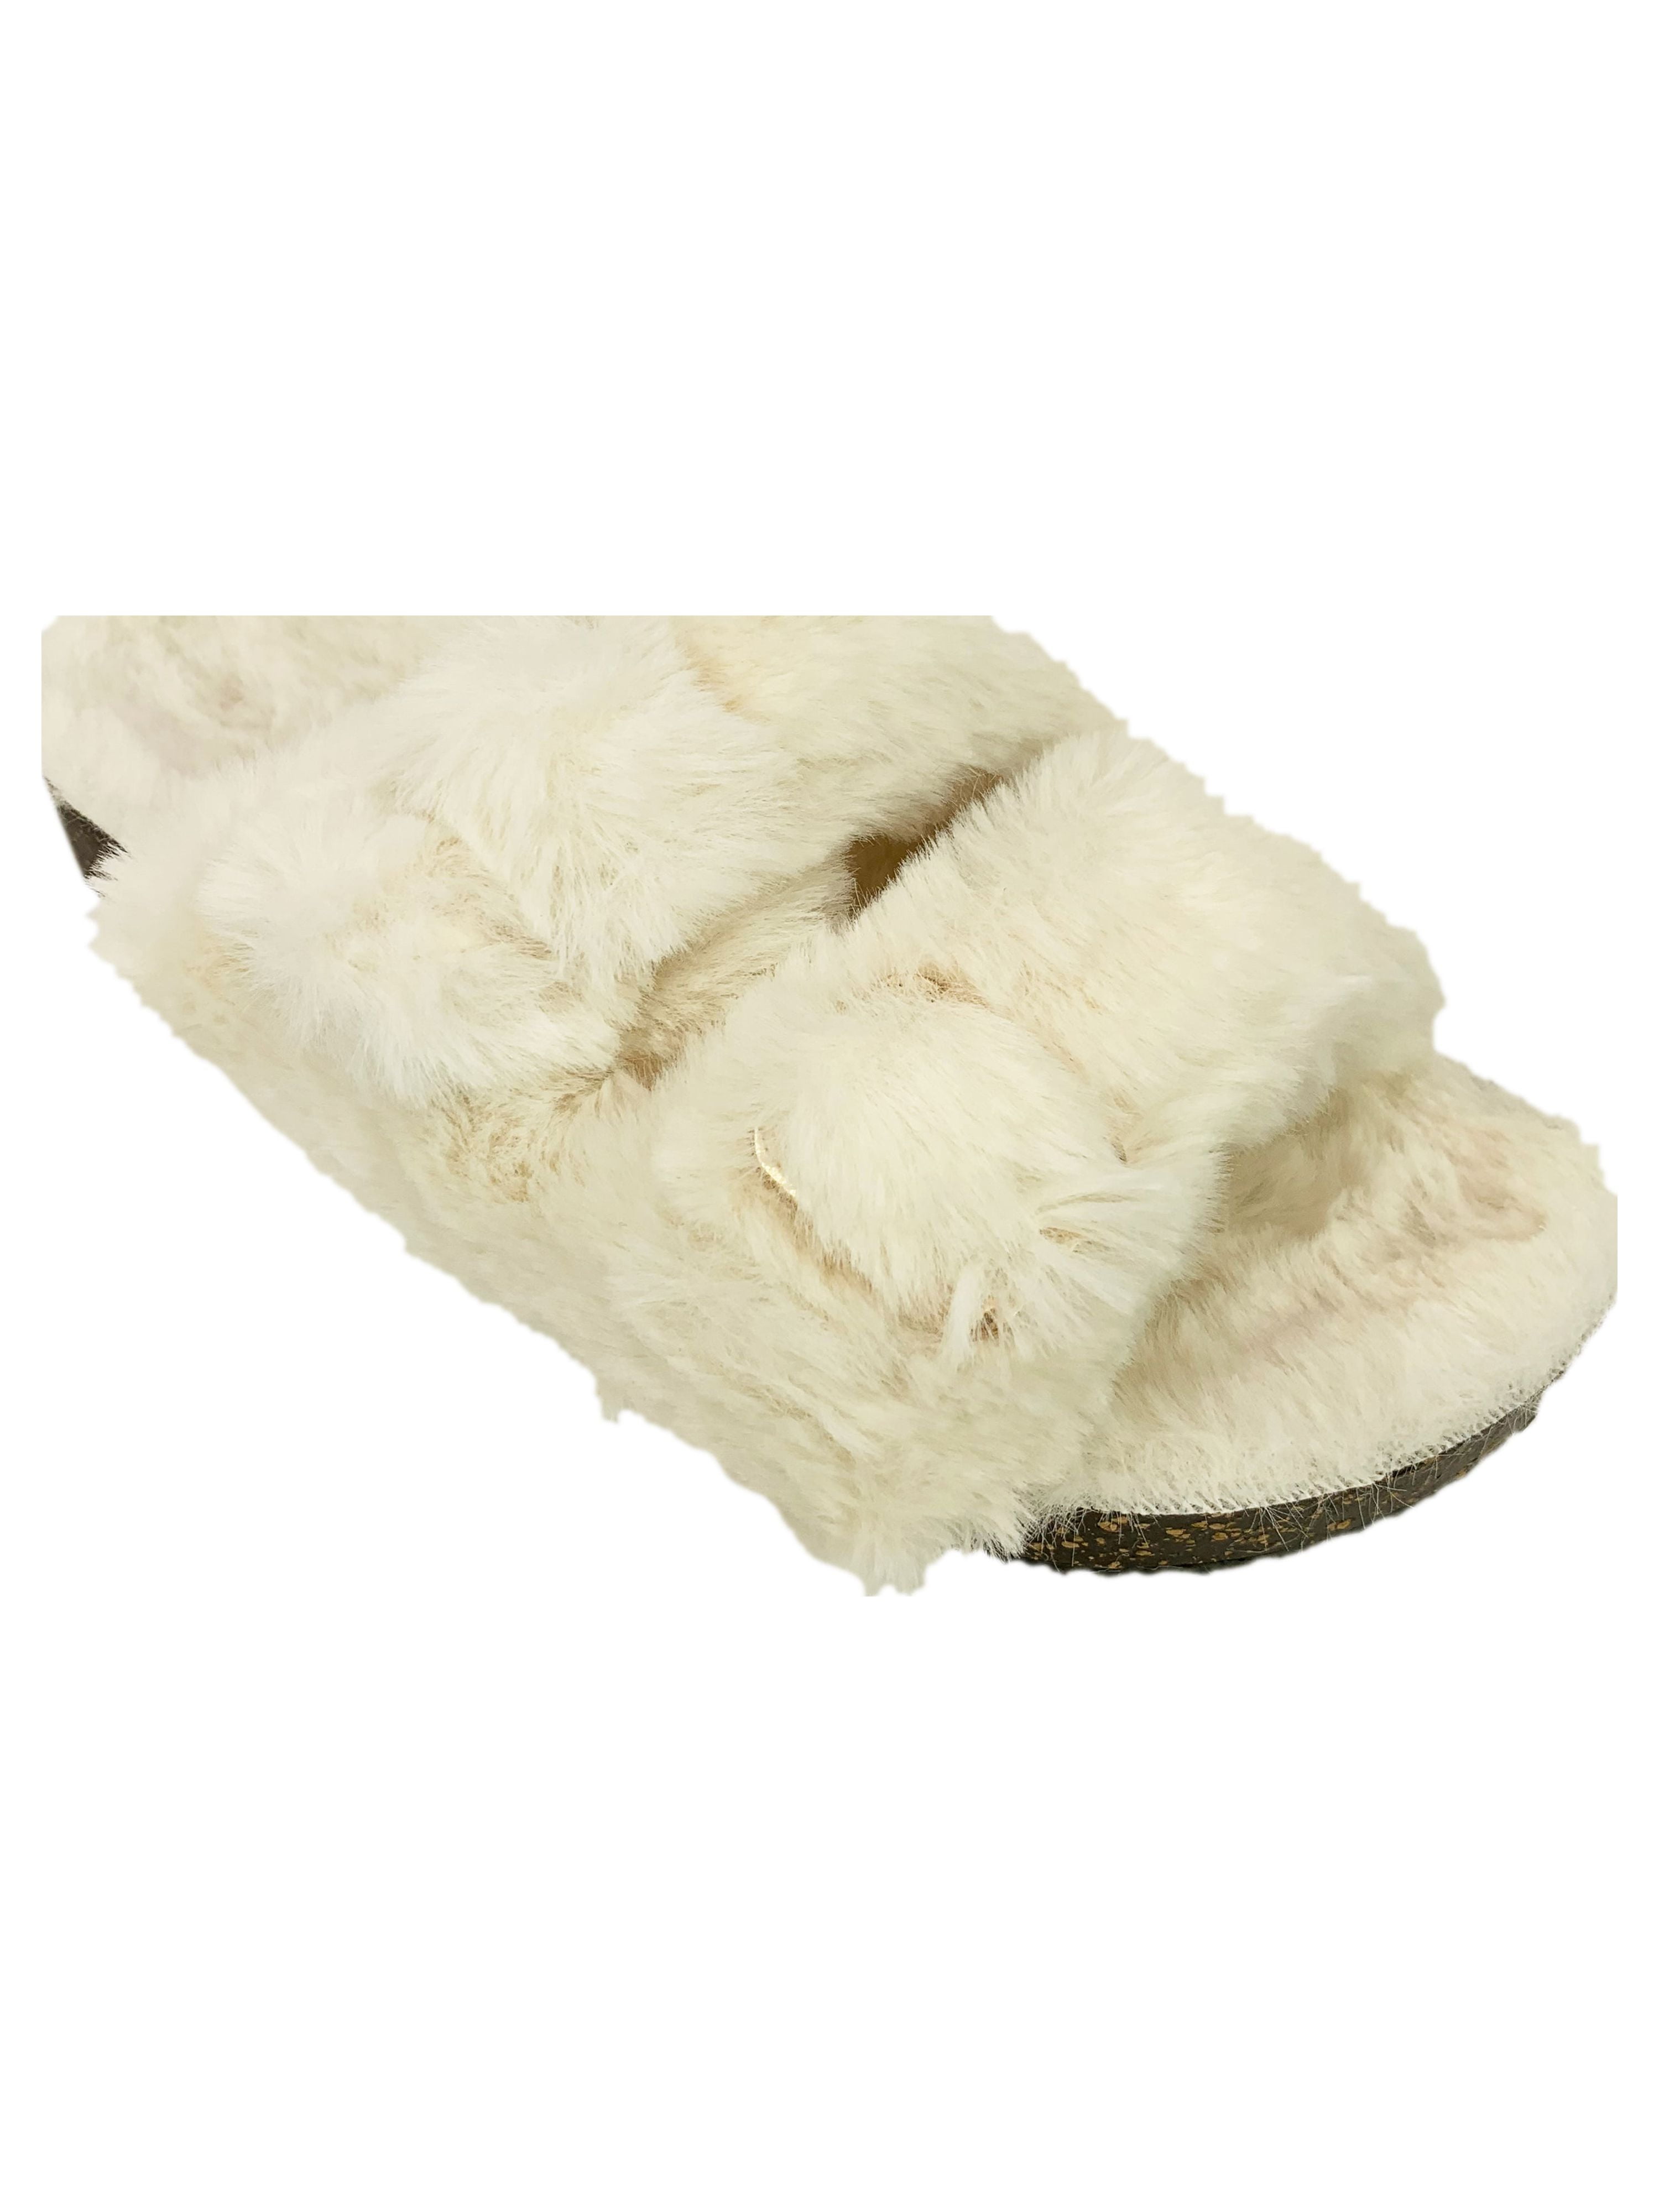 Bergman Kelly Women's Fuzzy Faux Fur Slide Slippers, Starlet Collection -  Scuff Style (US Company) 